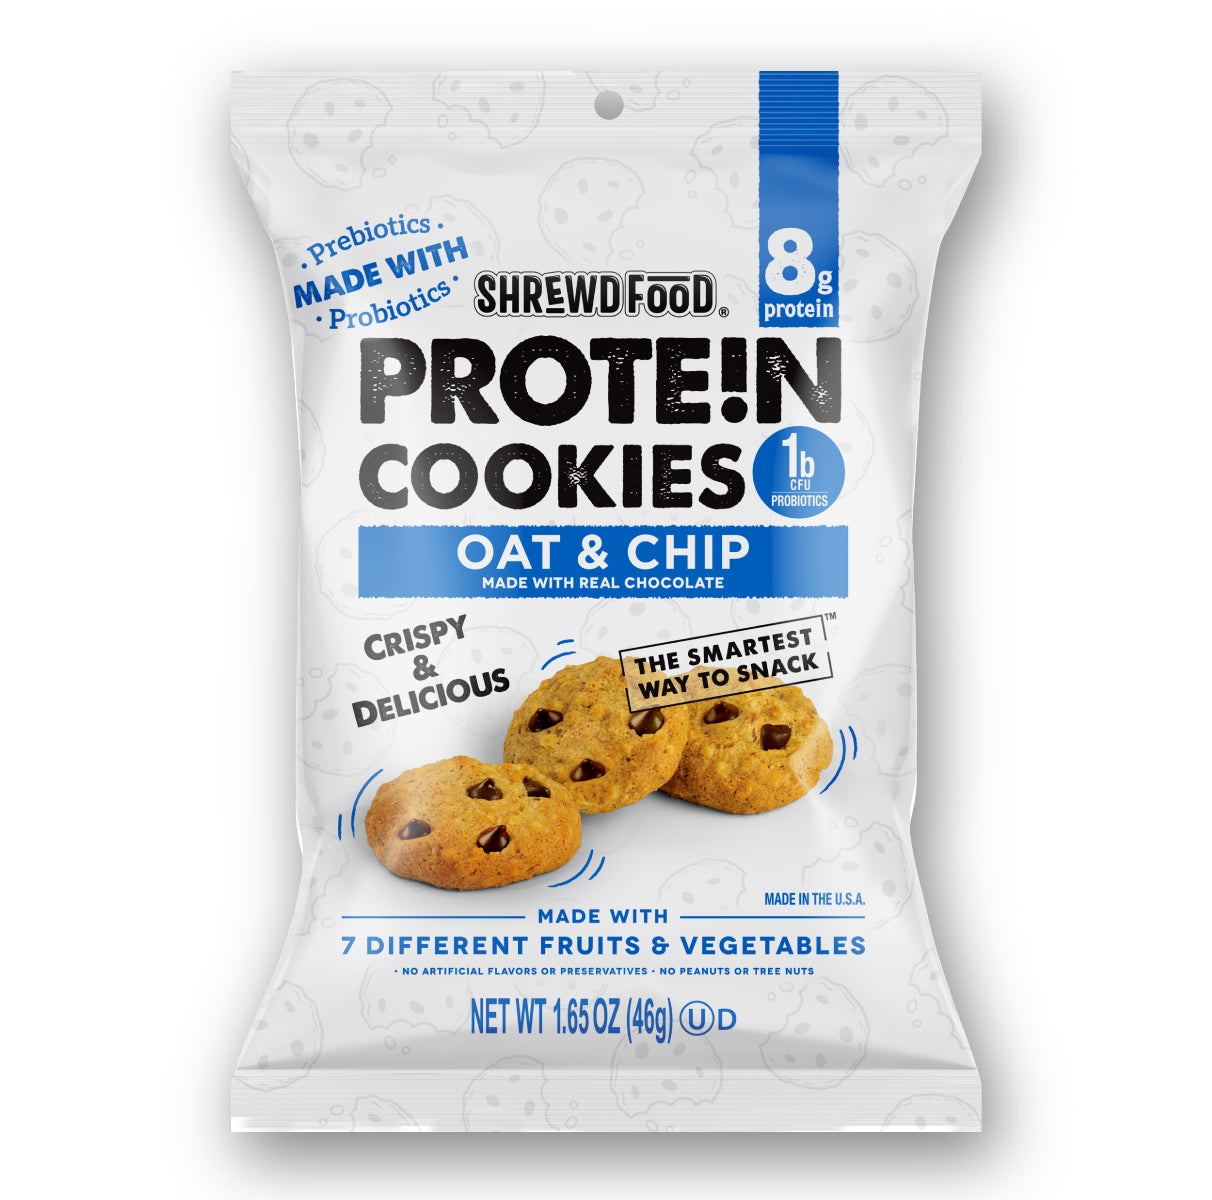 Oat & Chip Protein Cookies